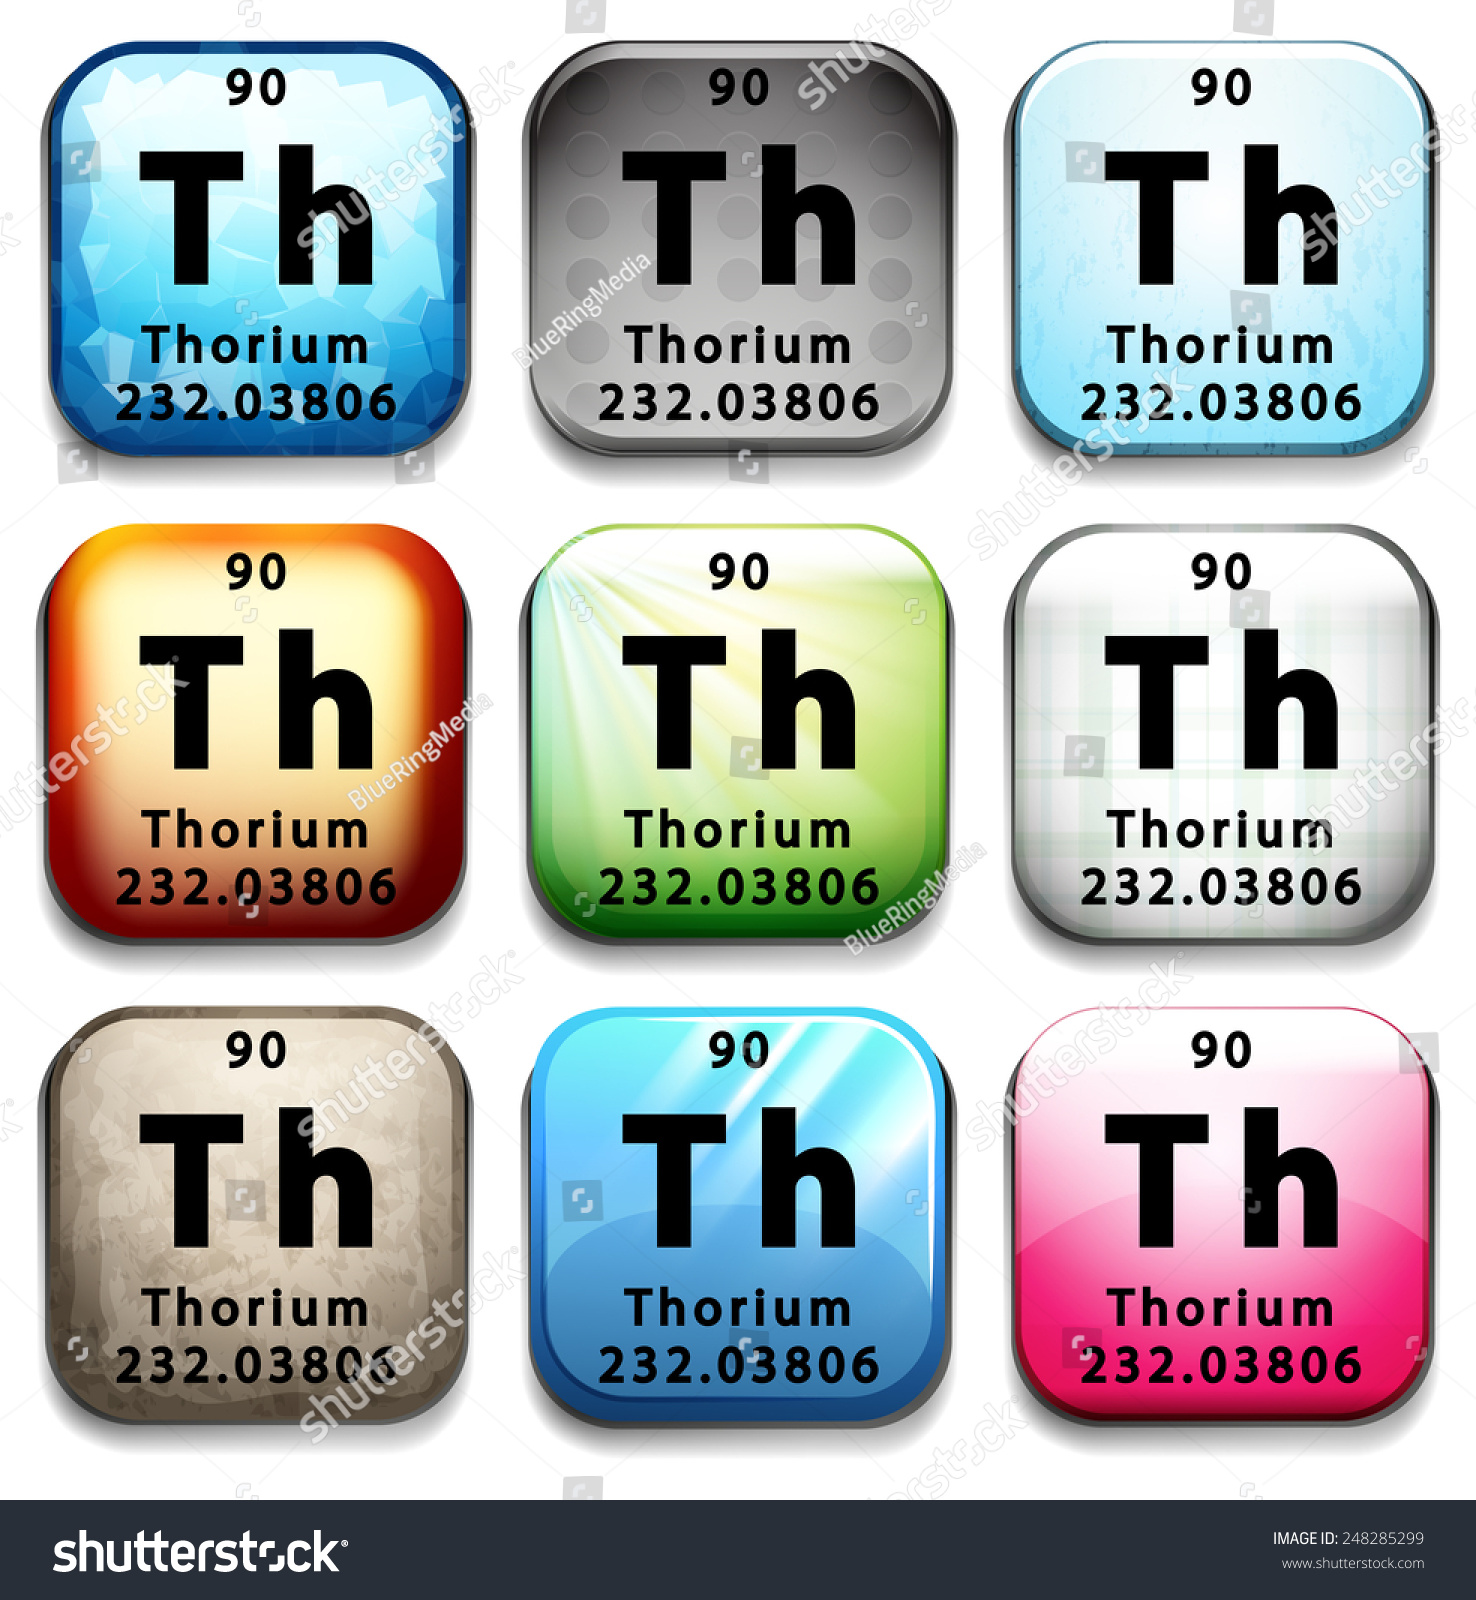 A button showing the chemical element Thorium on - Royalty Free Stock ...